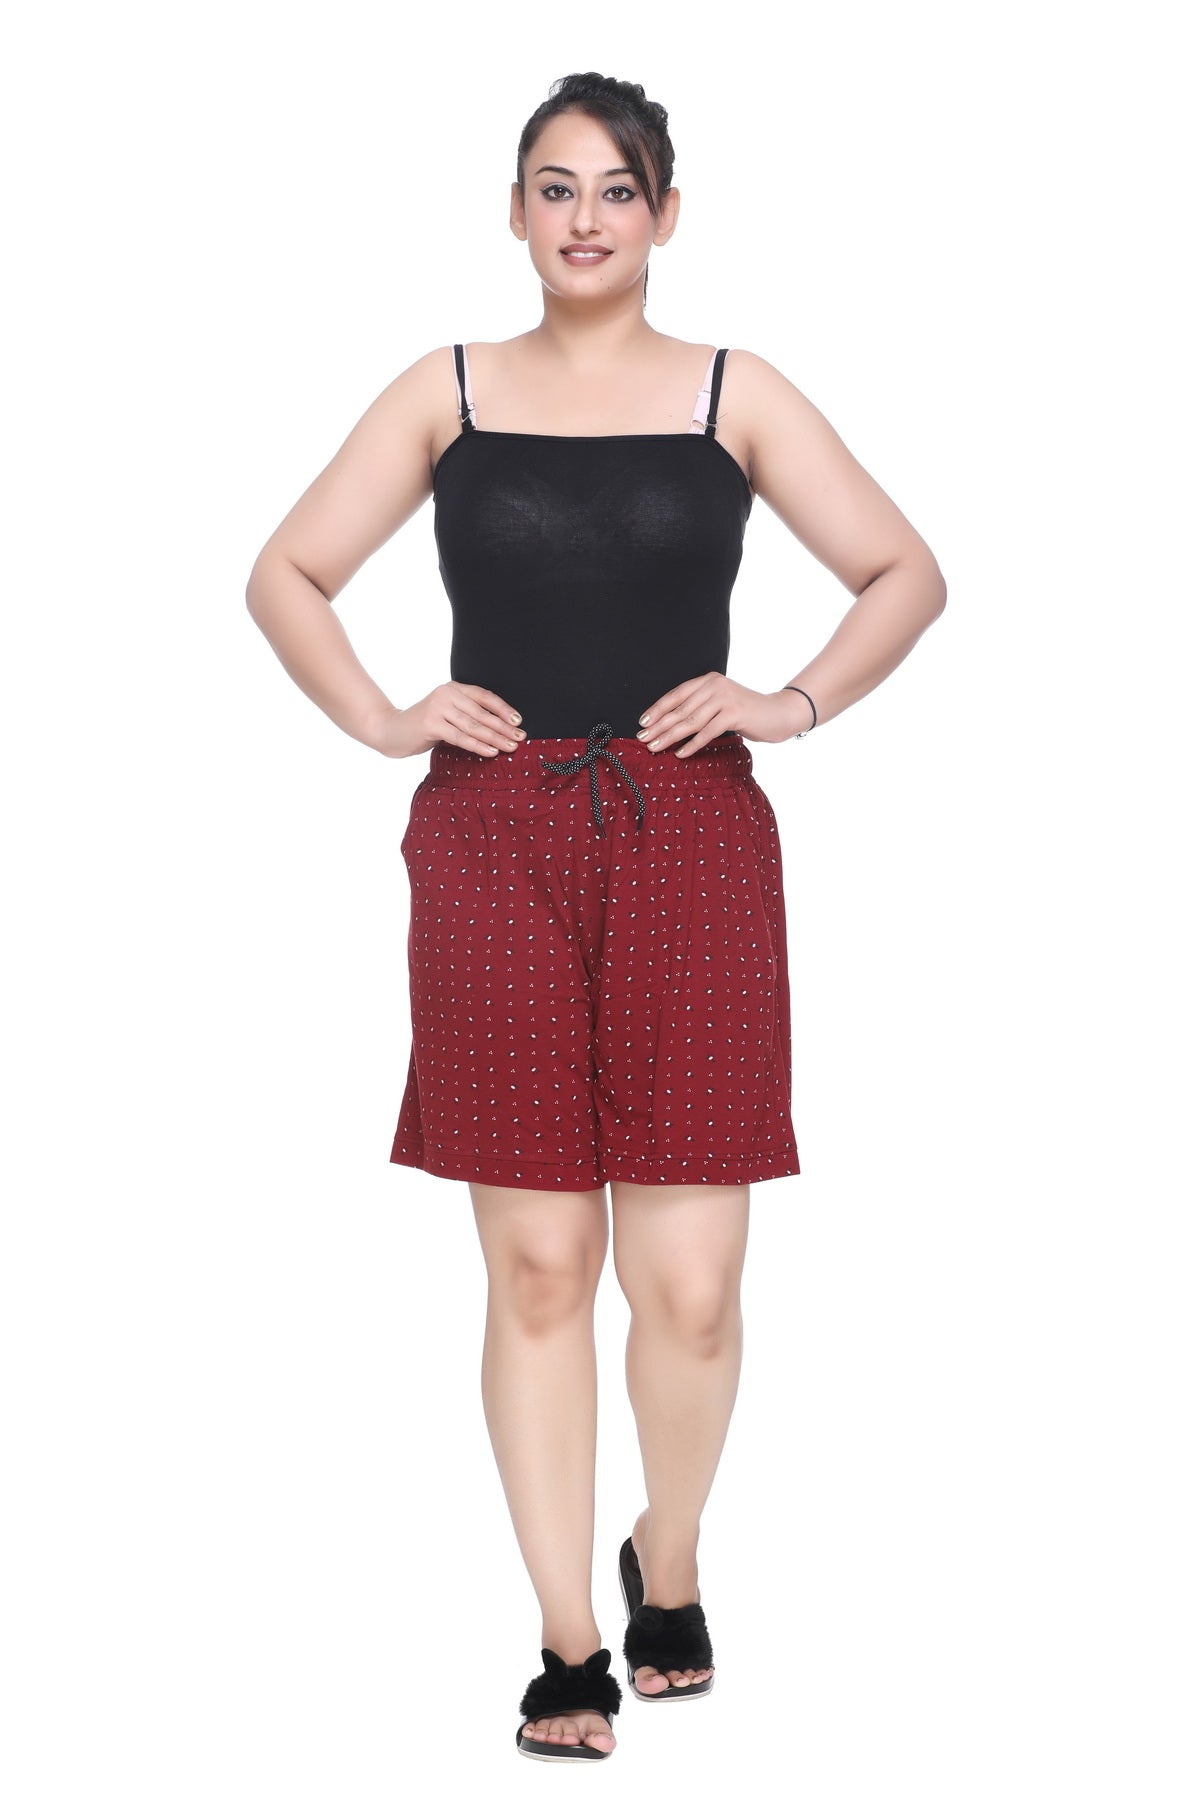 Plus Size Cotton Shorts For Women - Printed Bermuda - Cherry Red